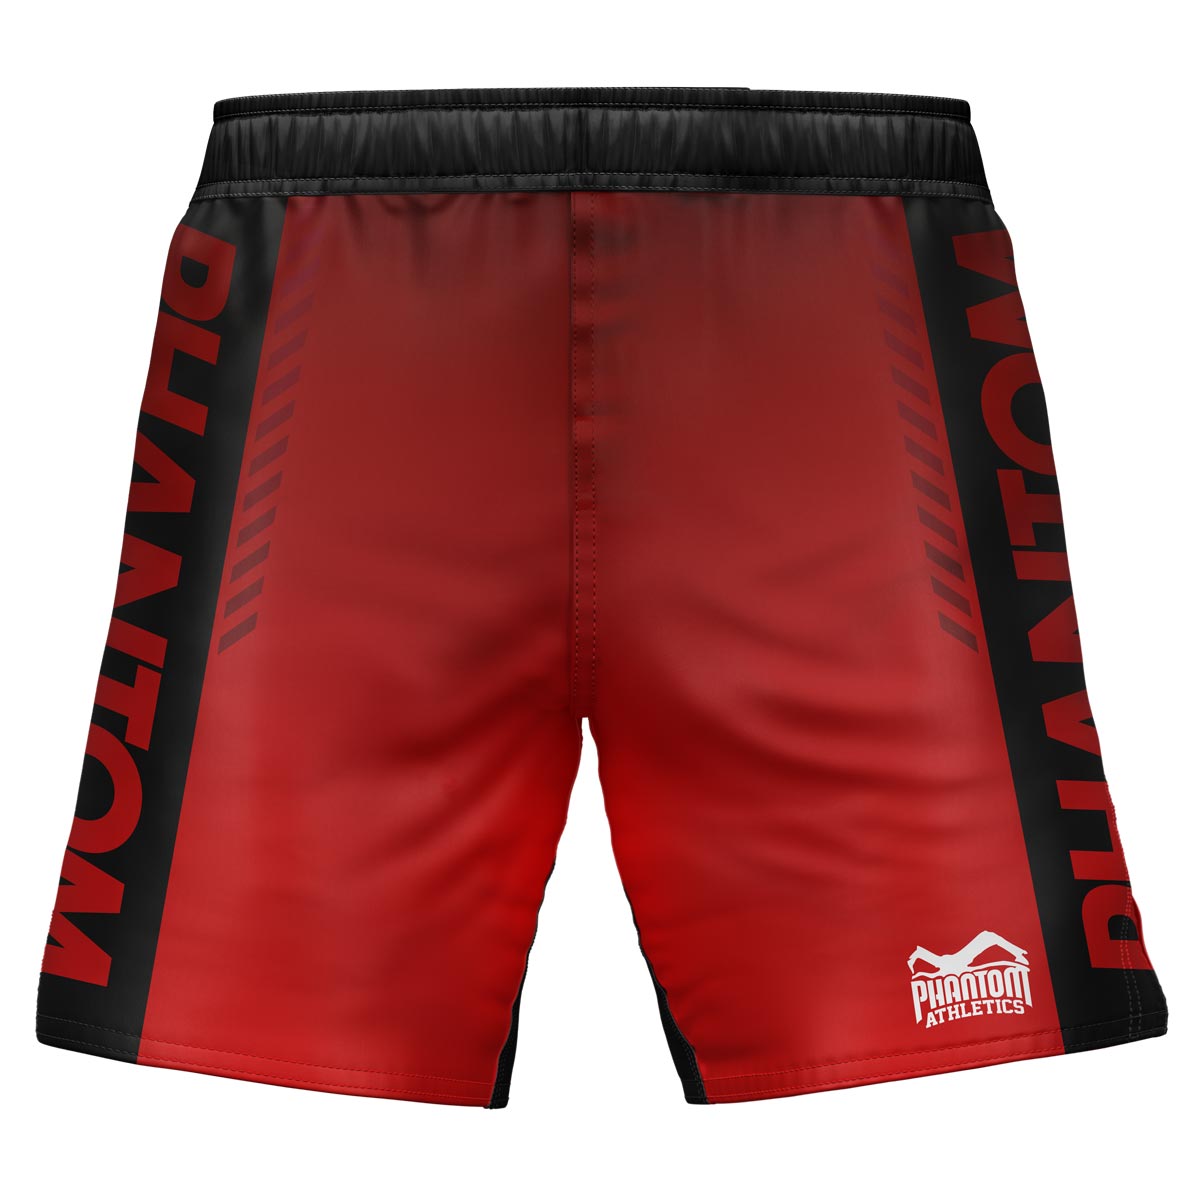 Phantom MMA fight shorts in the limited RED edition. Ultra flexible and tear-resistant. Ideal for MMA, wrestling, BJJ, K1 or Thai boxing.